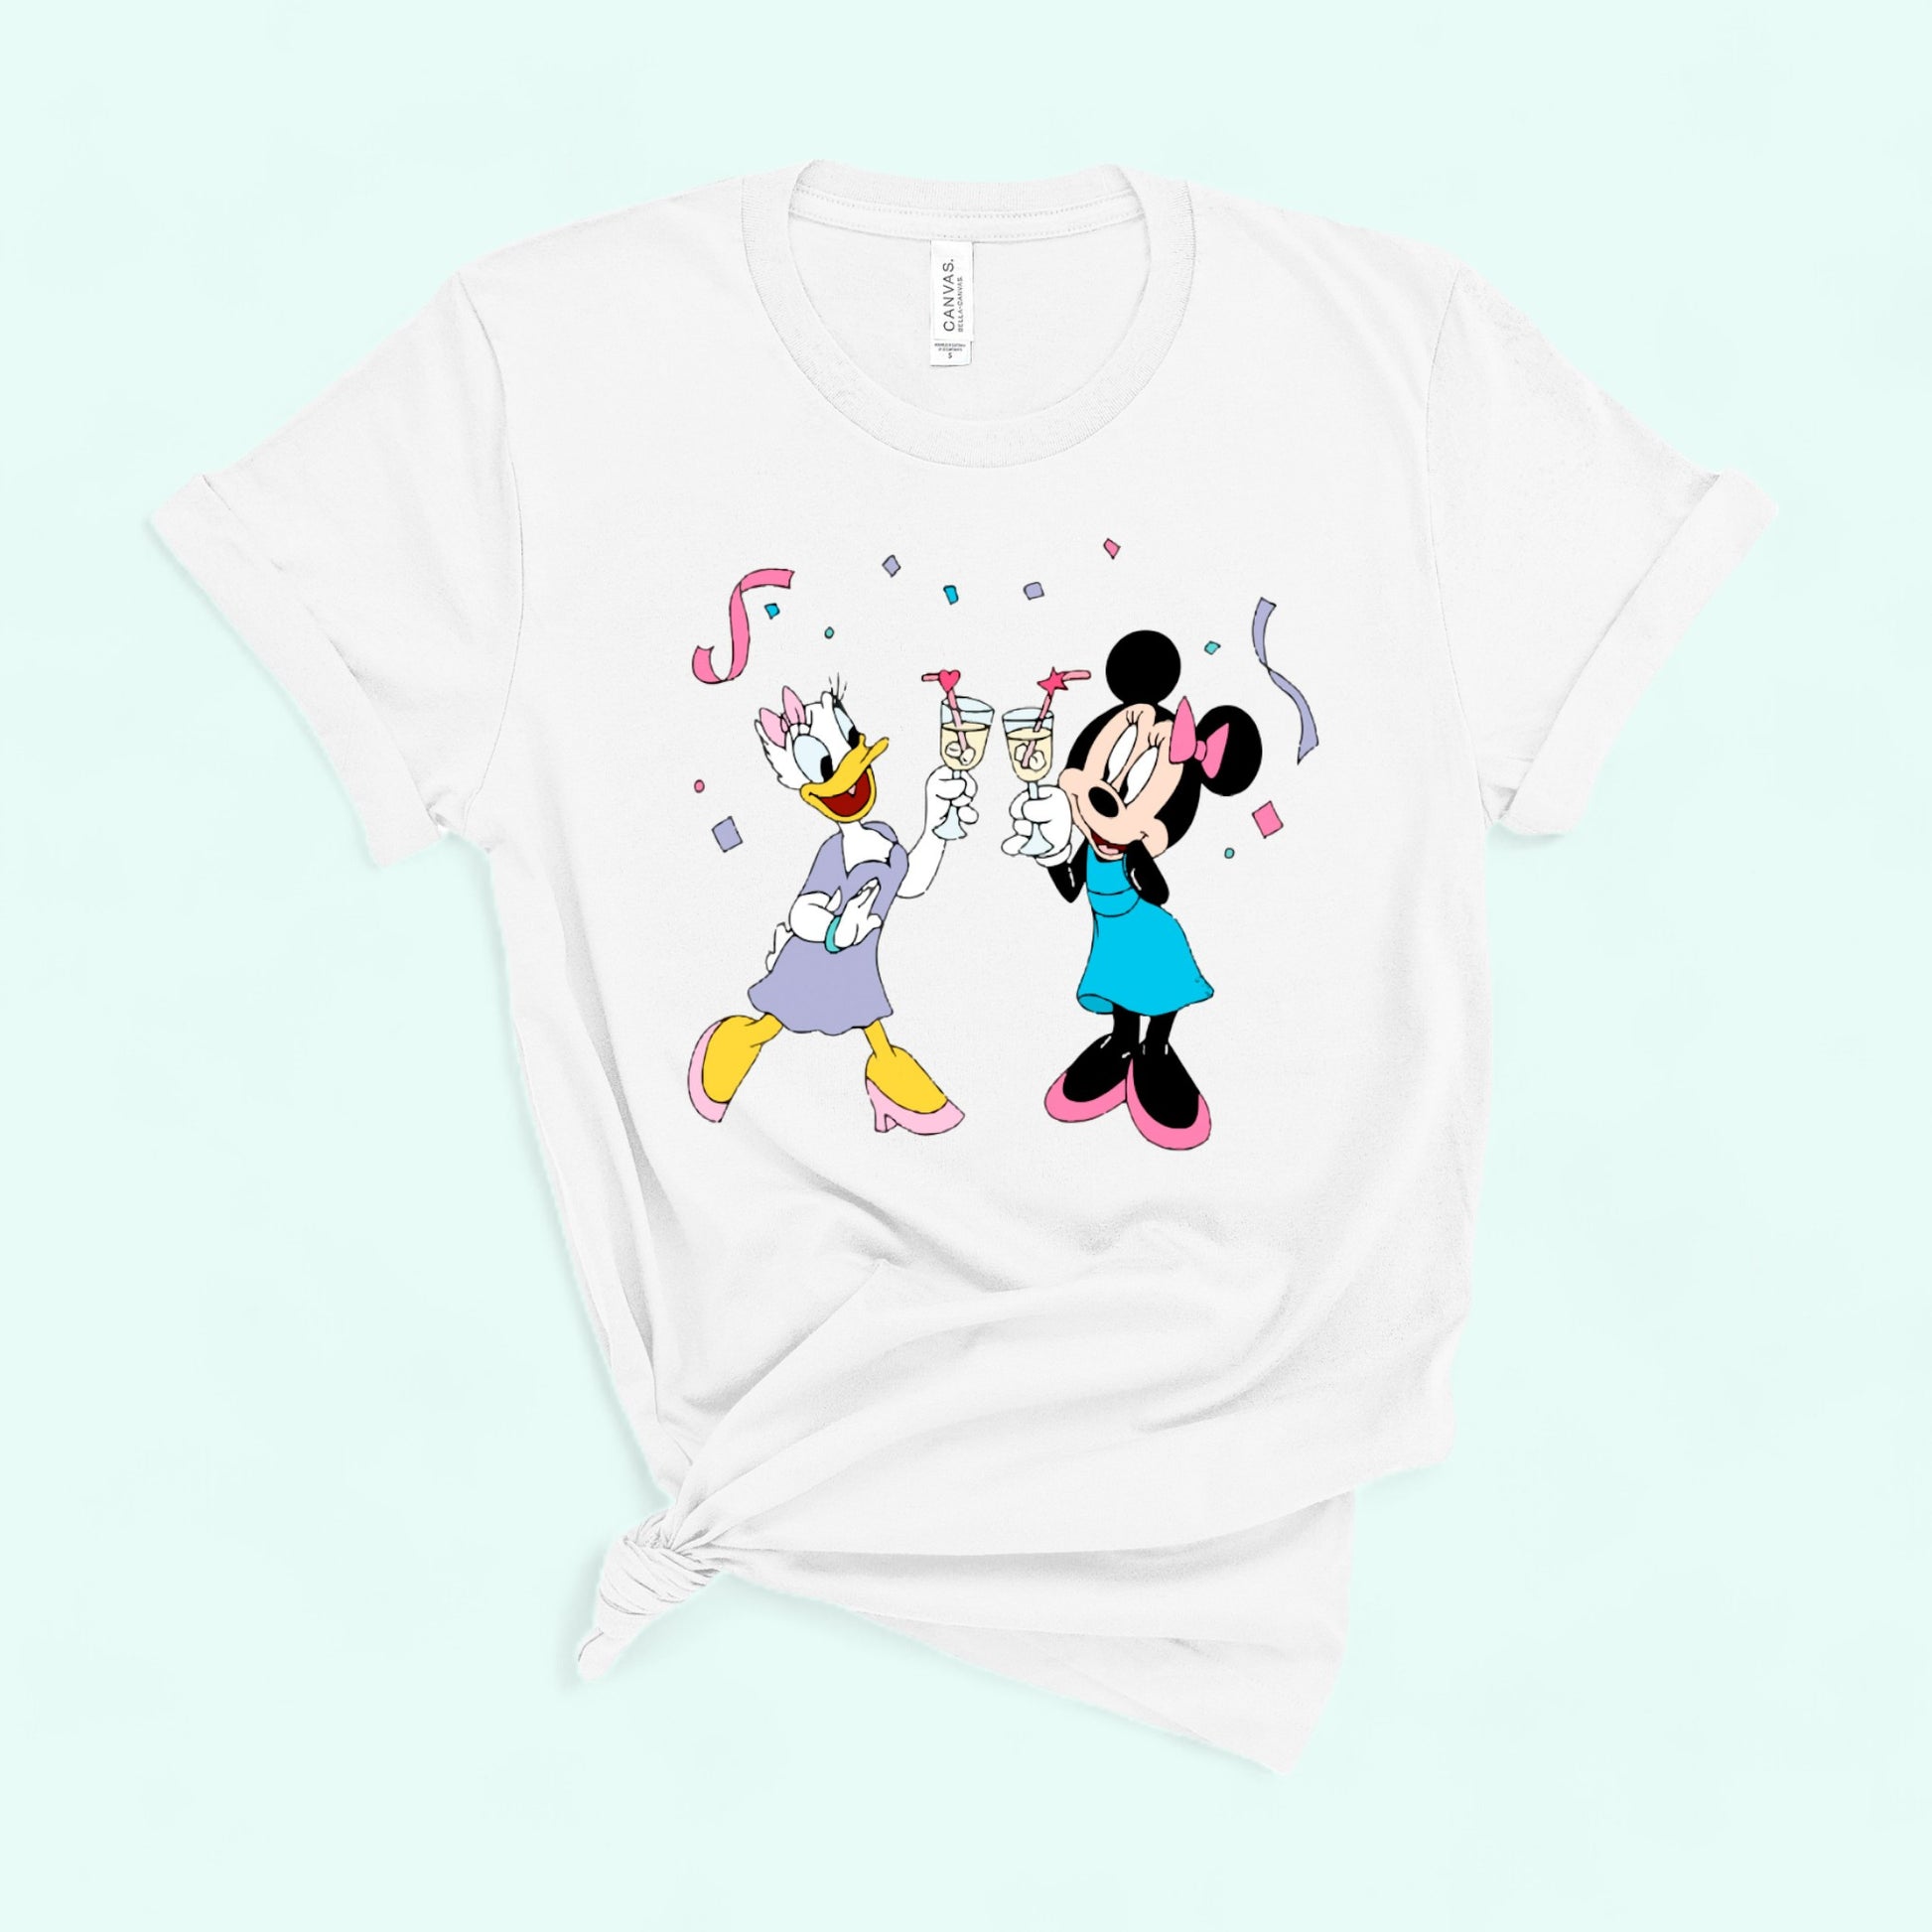 Minnie and Daisy Shirt white color 